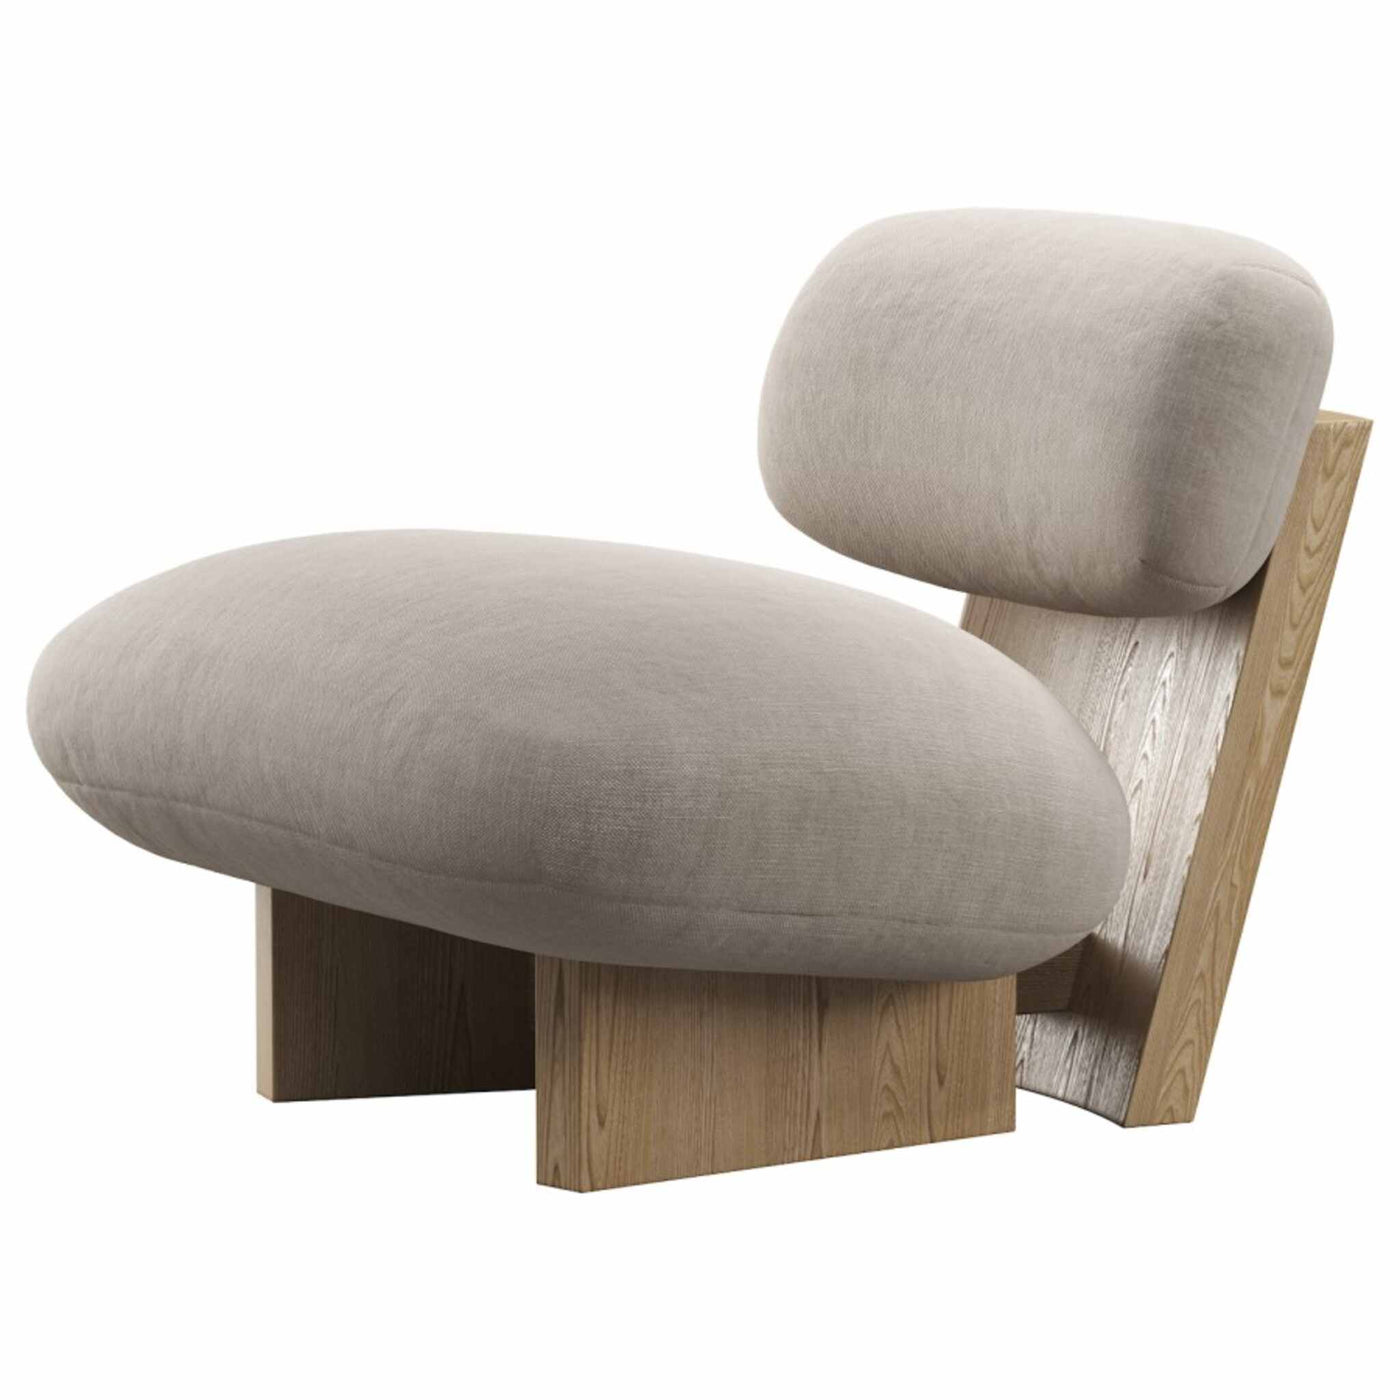 LegnoLuxe Chaise